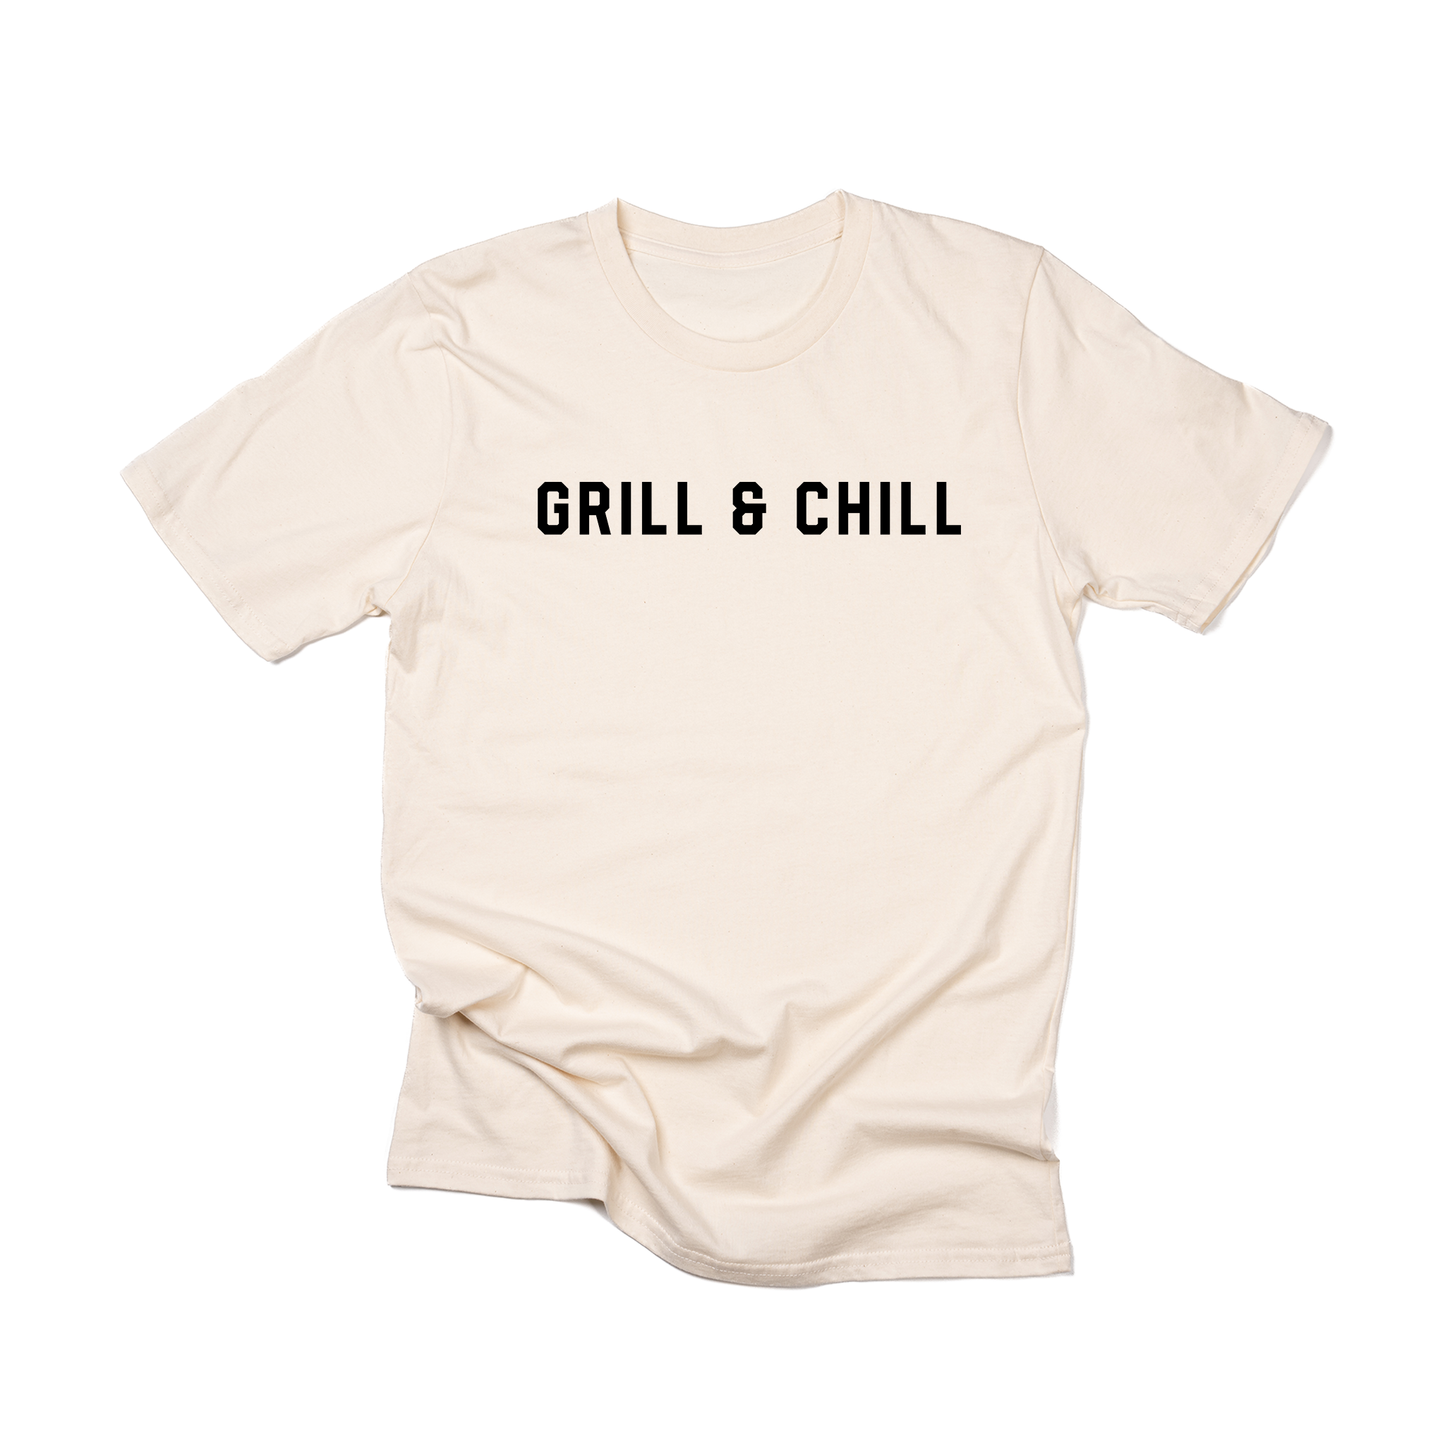 Grill & Chill (Black) - Tee (Natural)